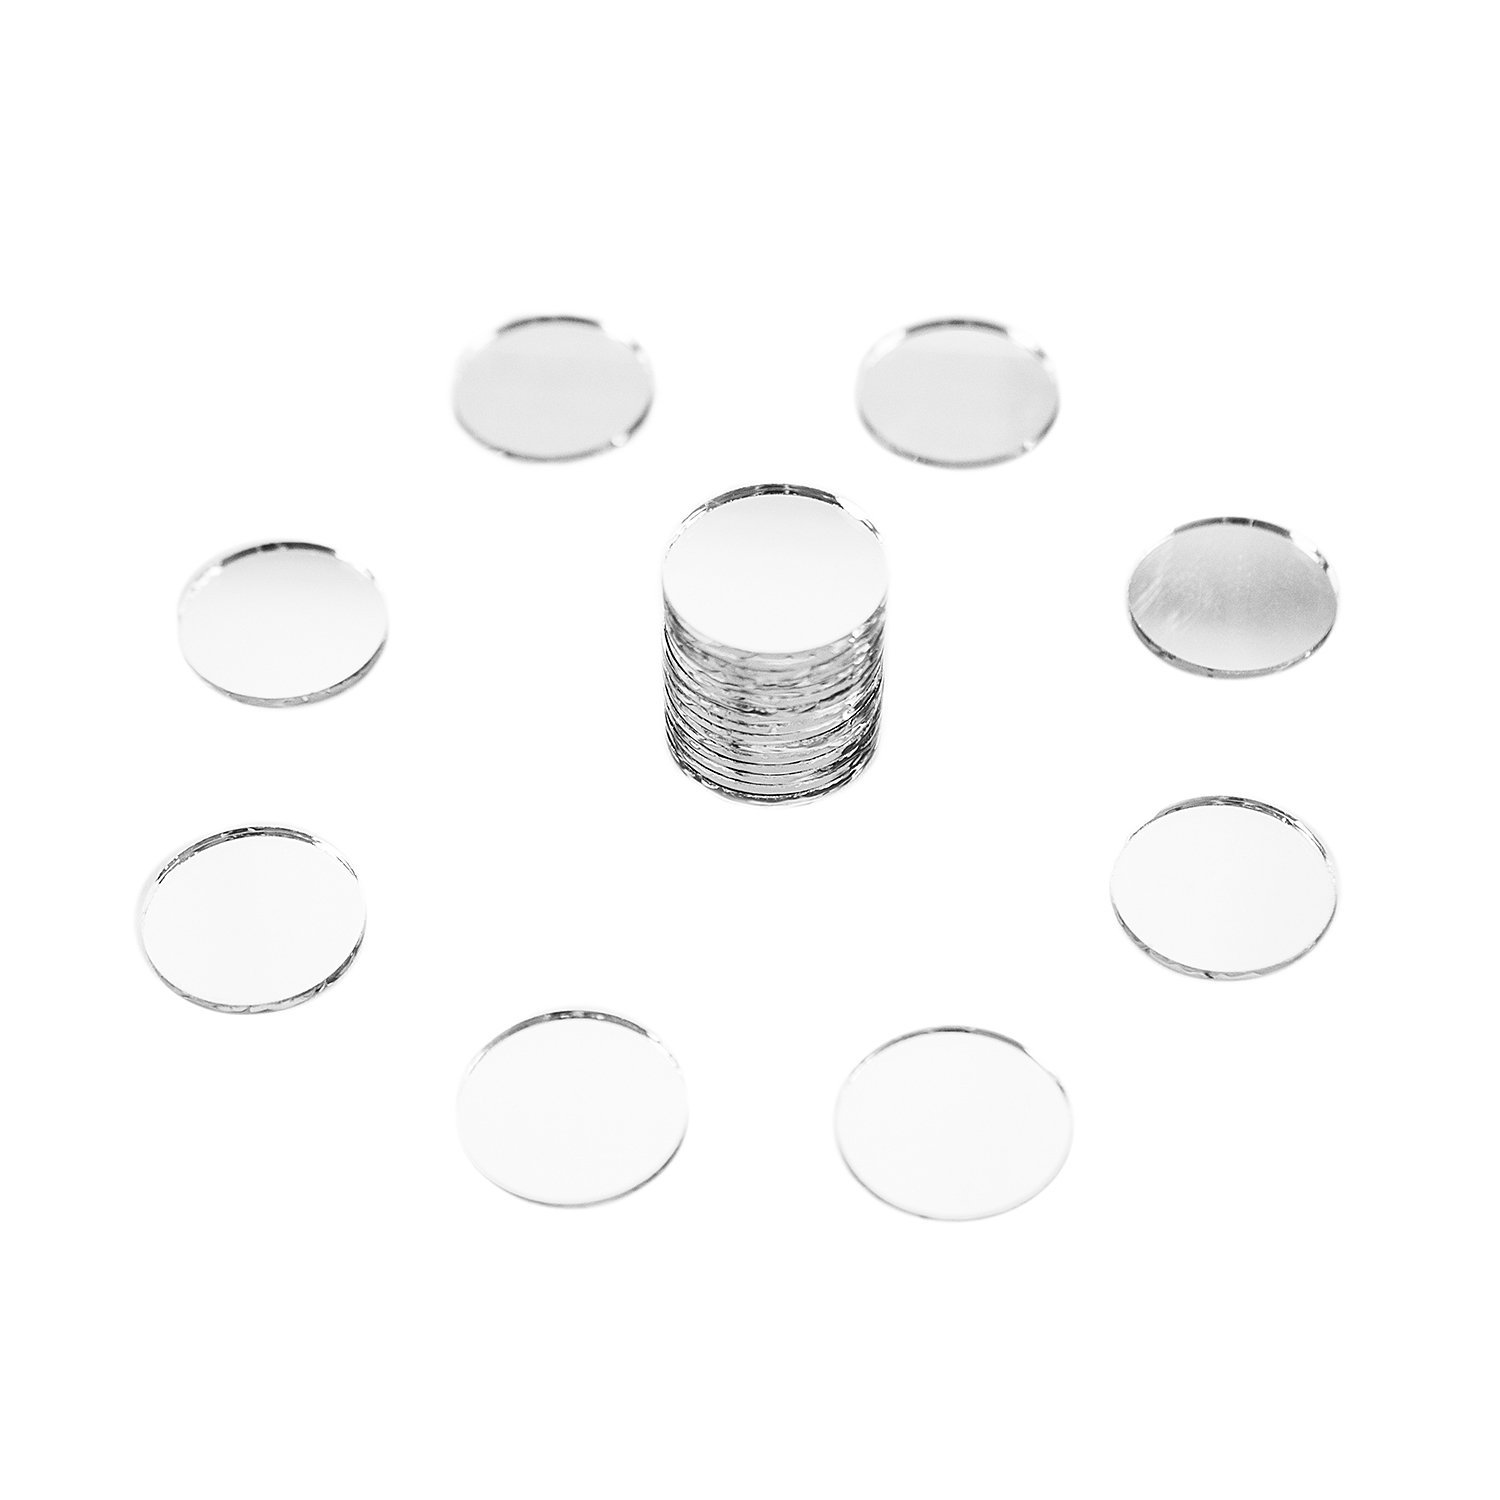 Mini 1 Inch Small Round Glass Mirror Circles (50 Pieces) by Super Z Outlet